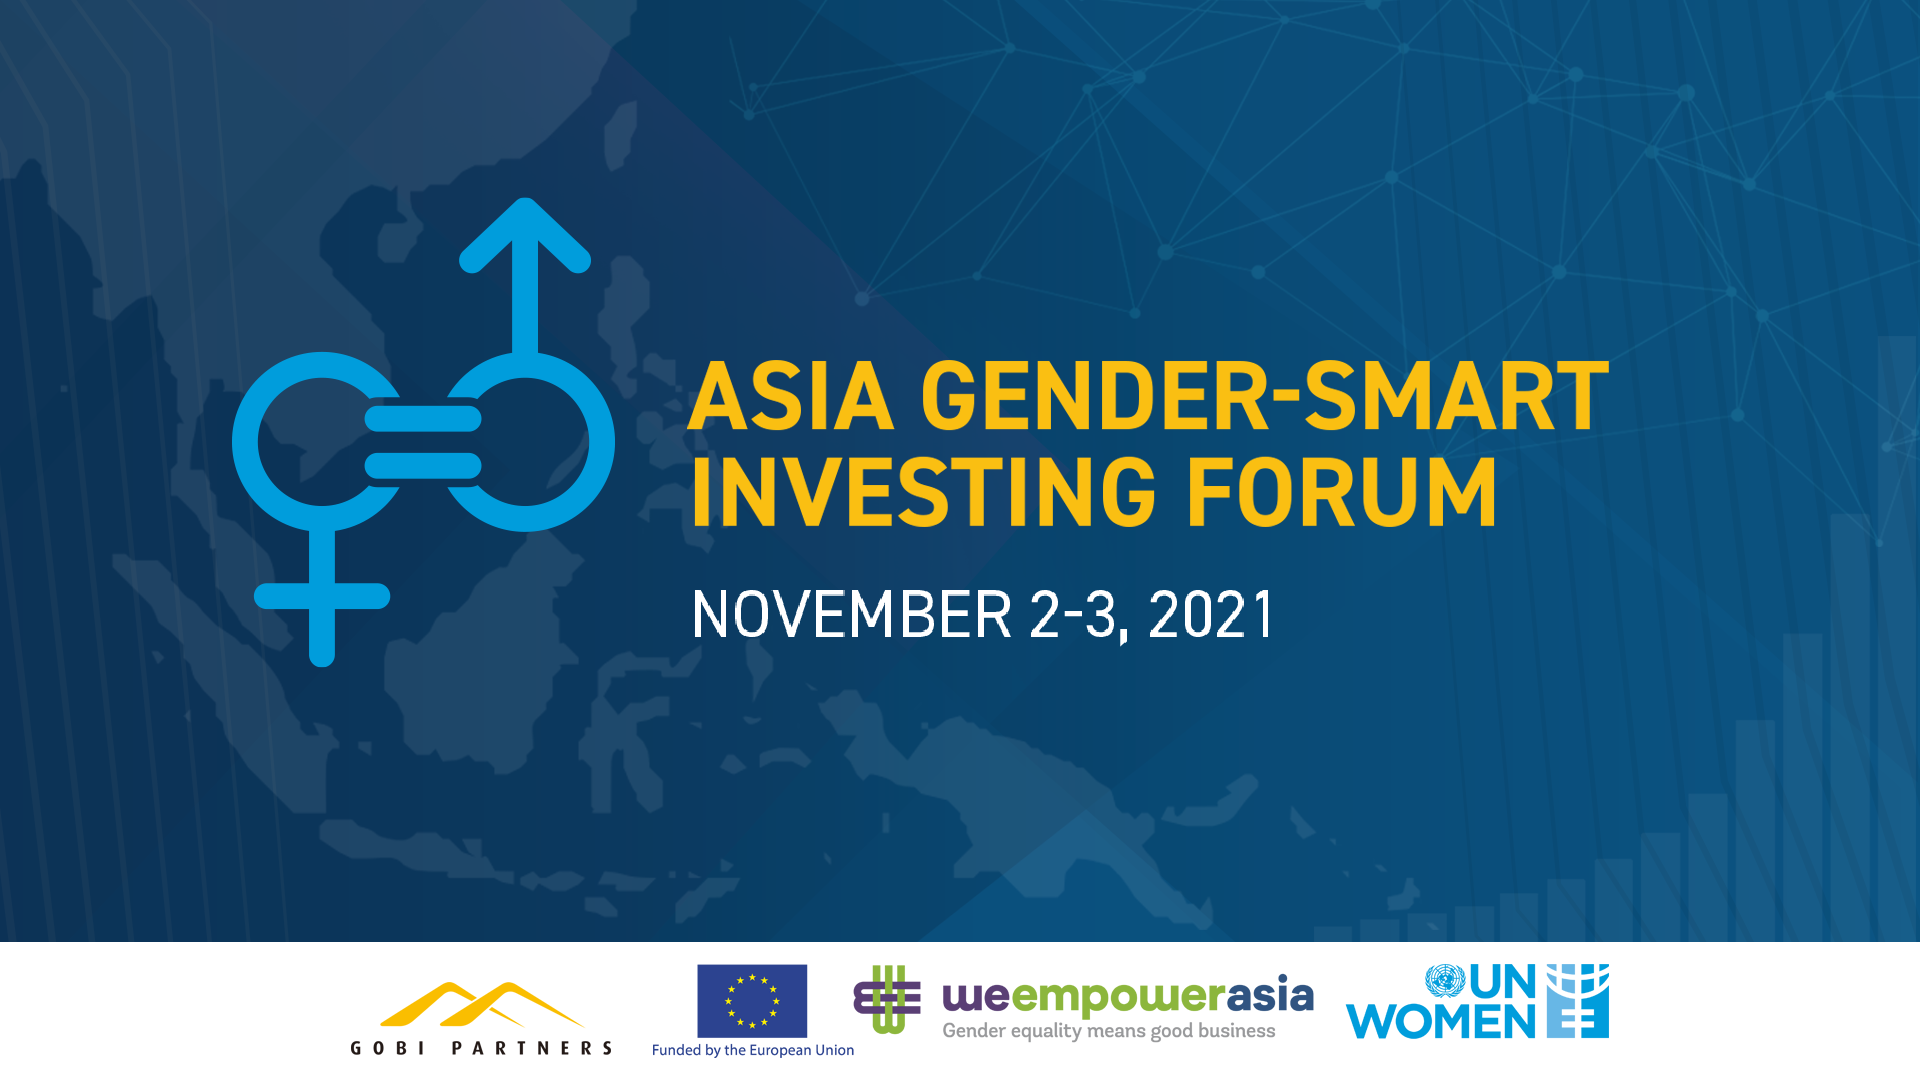 The Asia Gender-Smart Investing Forum will be held November 2–3